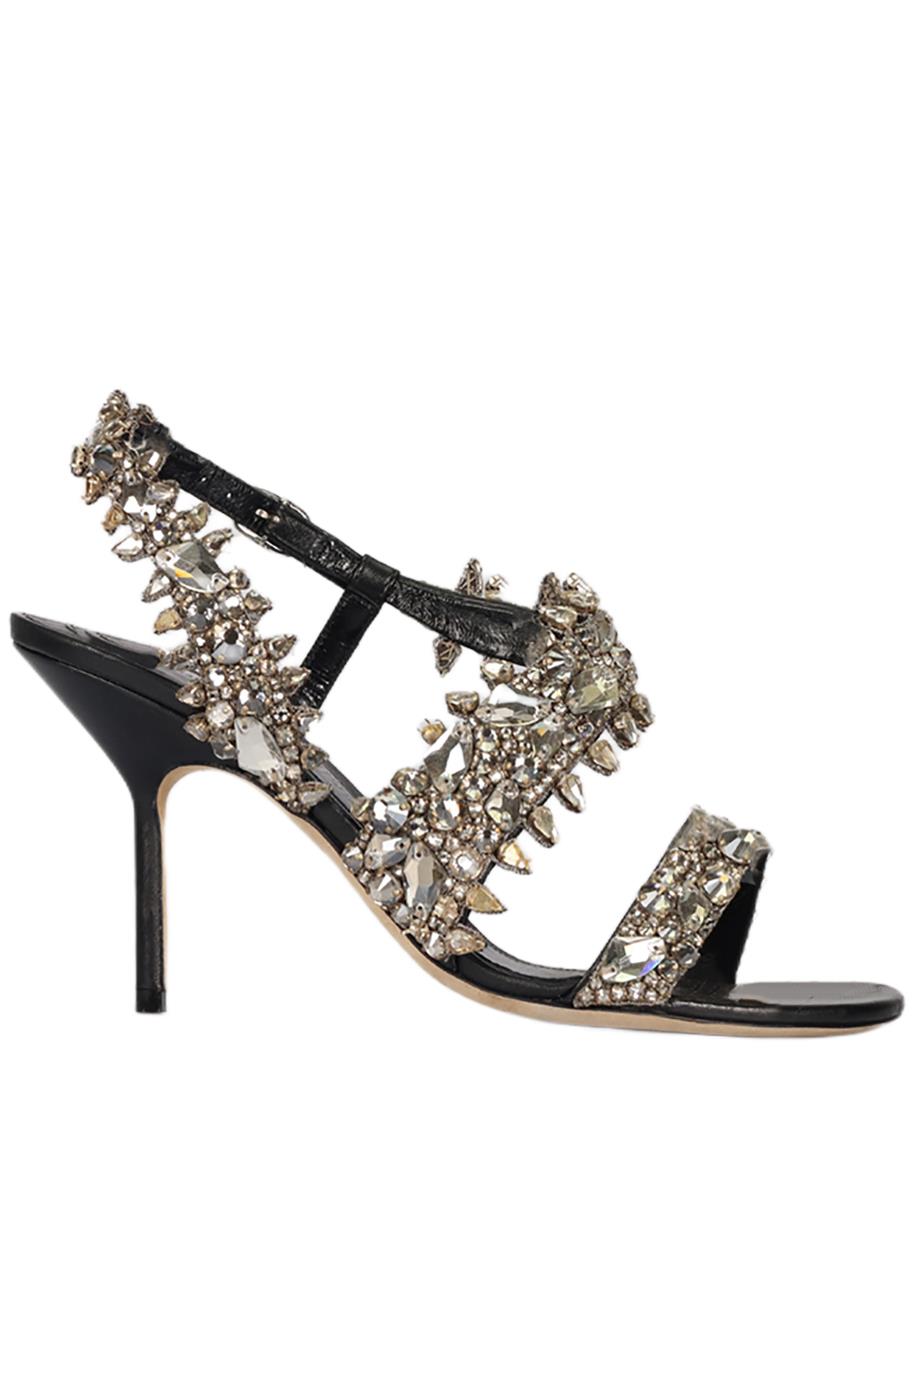 ALEXANDER MCQUEEN CRYSTAL AND LEATHER SANDALS EU 38.5 UK 5.5 US 8.5